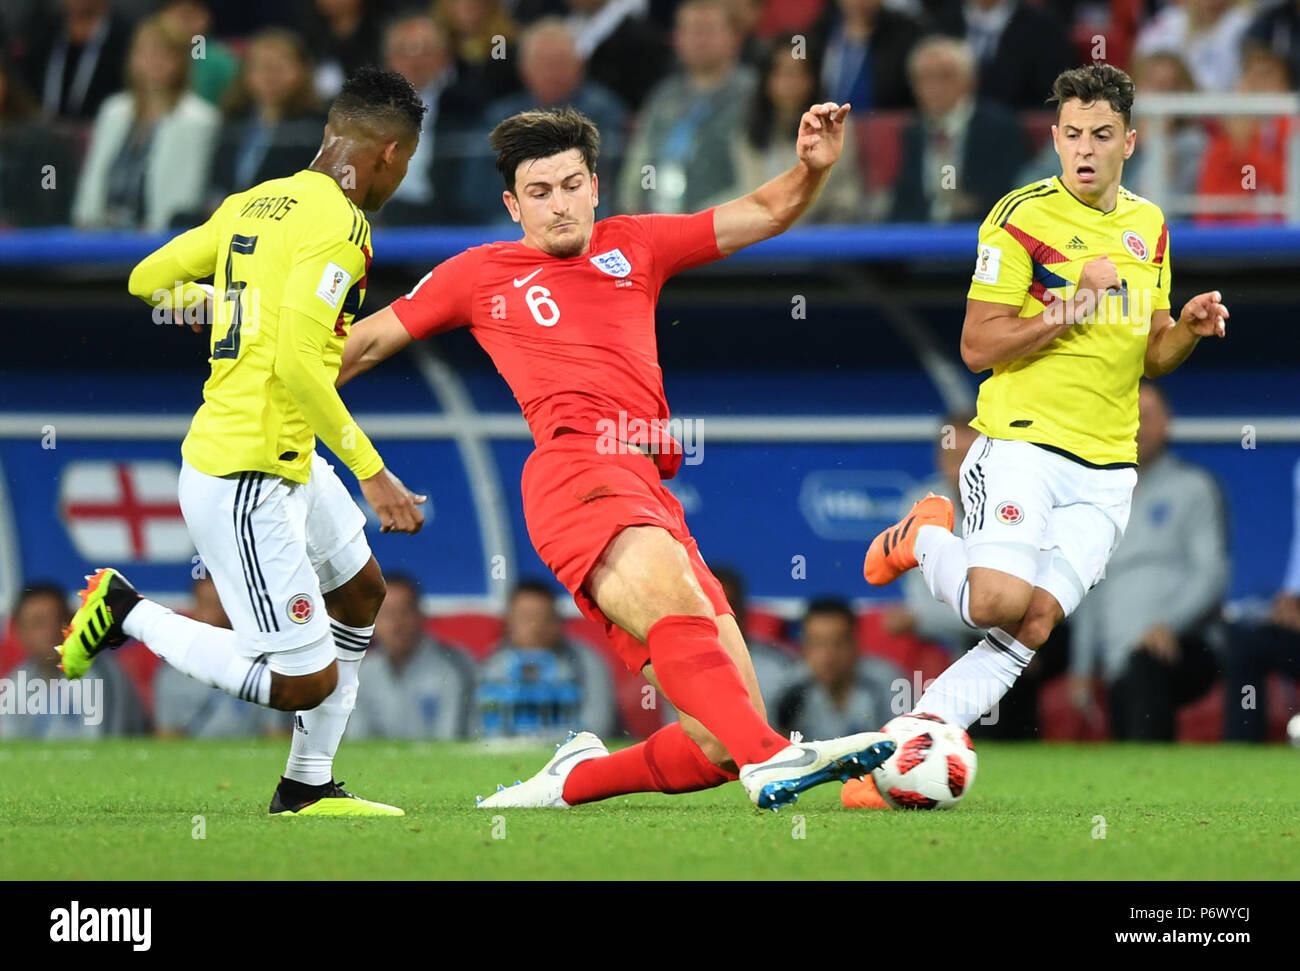 Moscow, Russia. 3rd July, 2018. Harry Maguire (C) of England vies with Wilmar Barrios (L) of Colombia during the 2018 FIFA World Cup round of 16 match between England and Colombia in Moscow, Russia, July 3, 2018. Credit: Du Yu/Xinhua/Alamy Live News Stock Photo